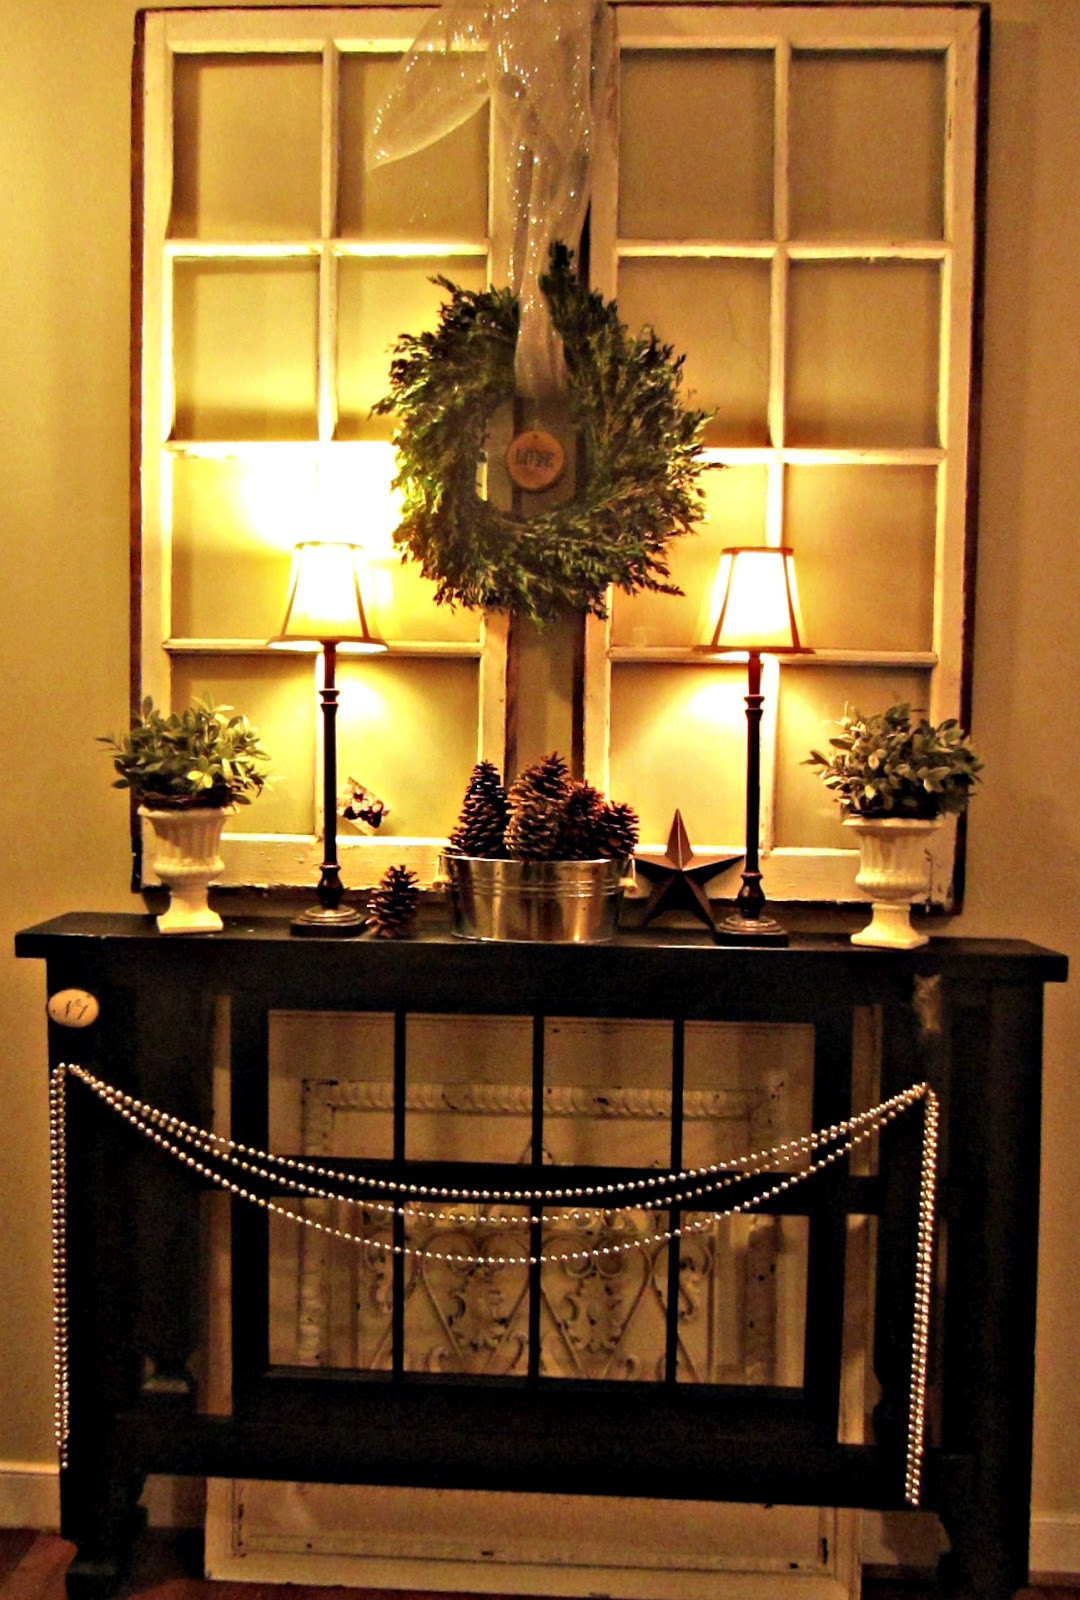 Foyer Christmas Decorating Ideas
 Down to Earth Style Foyer Christmas Mantel